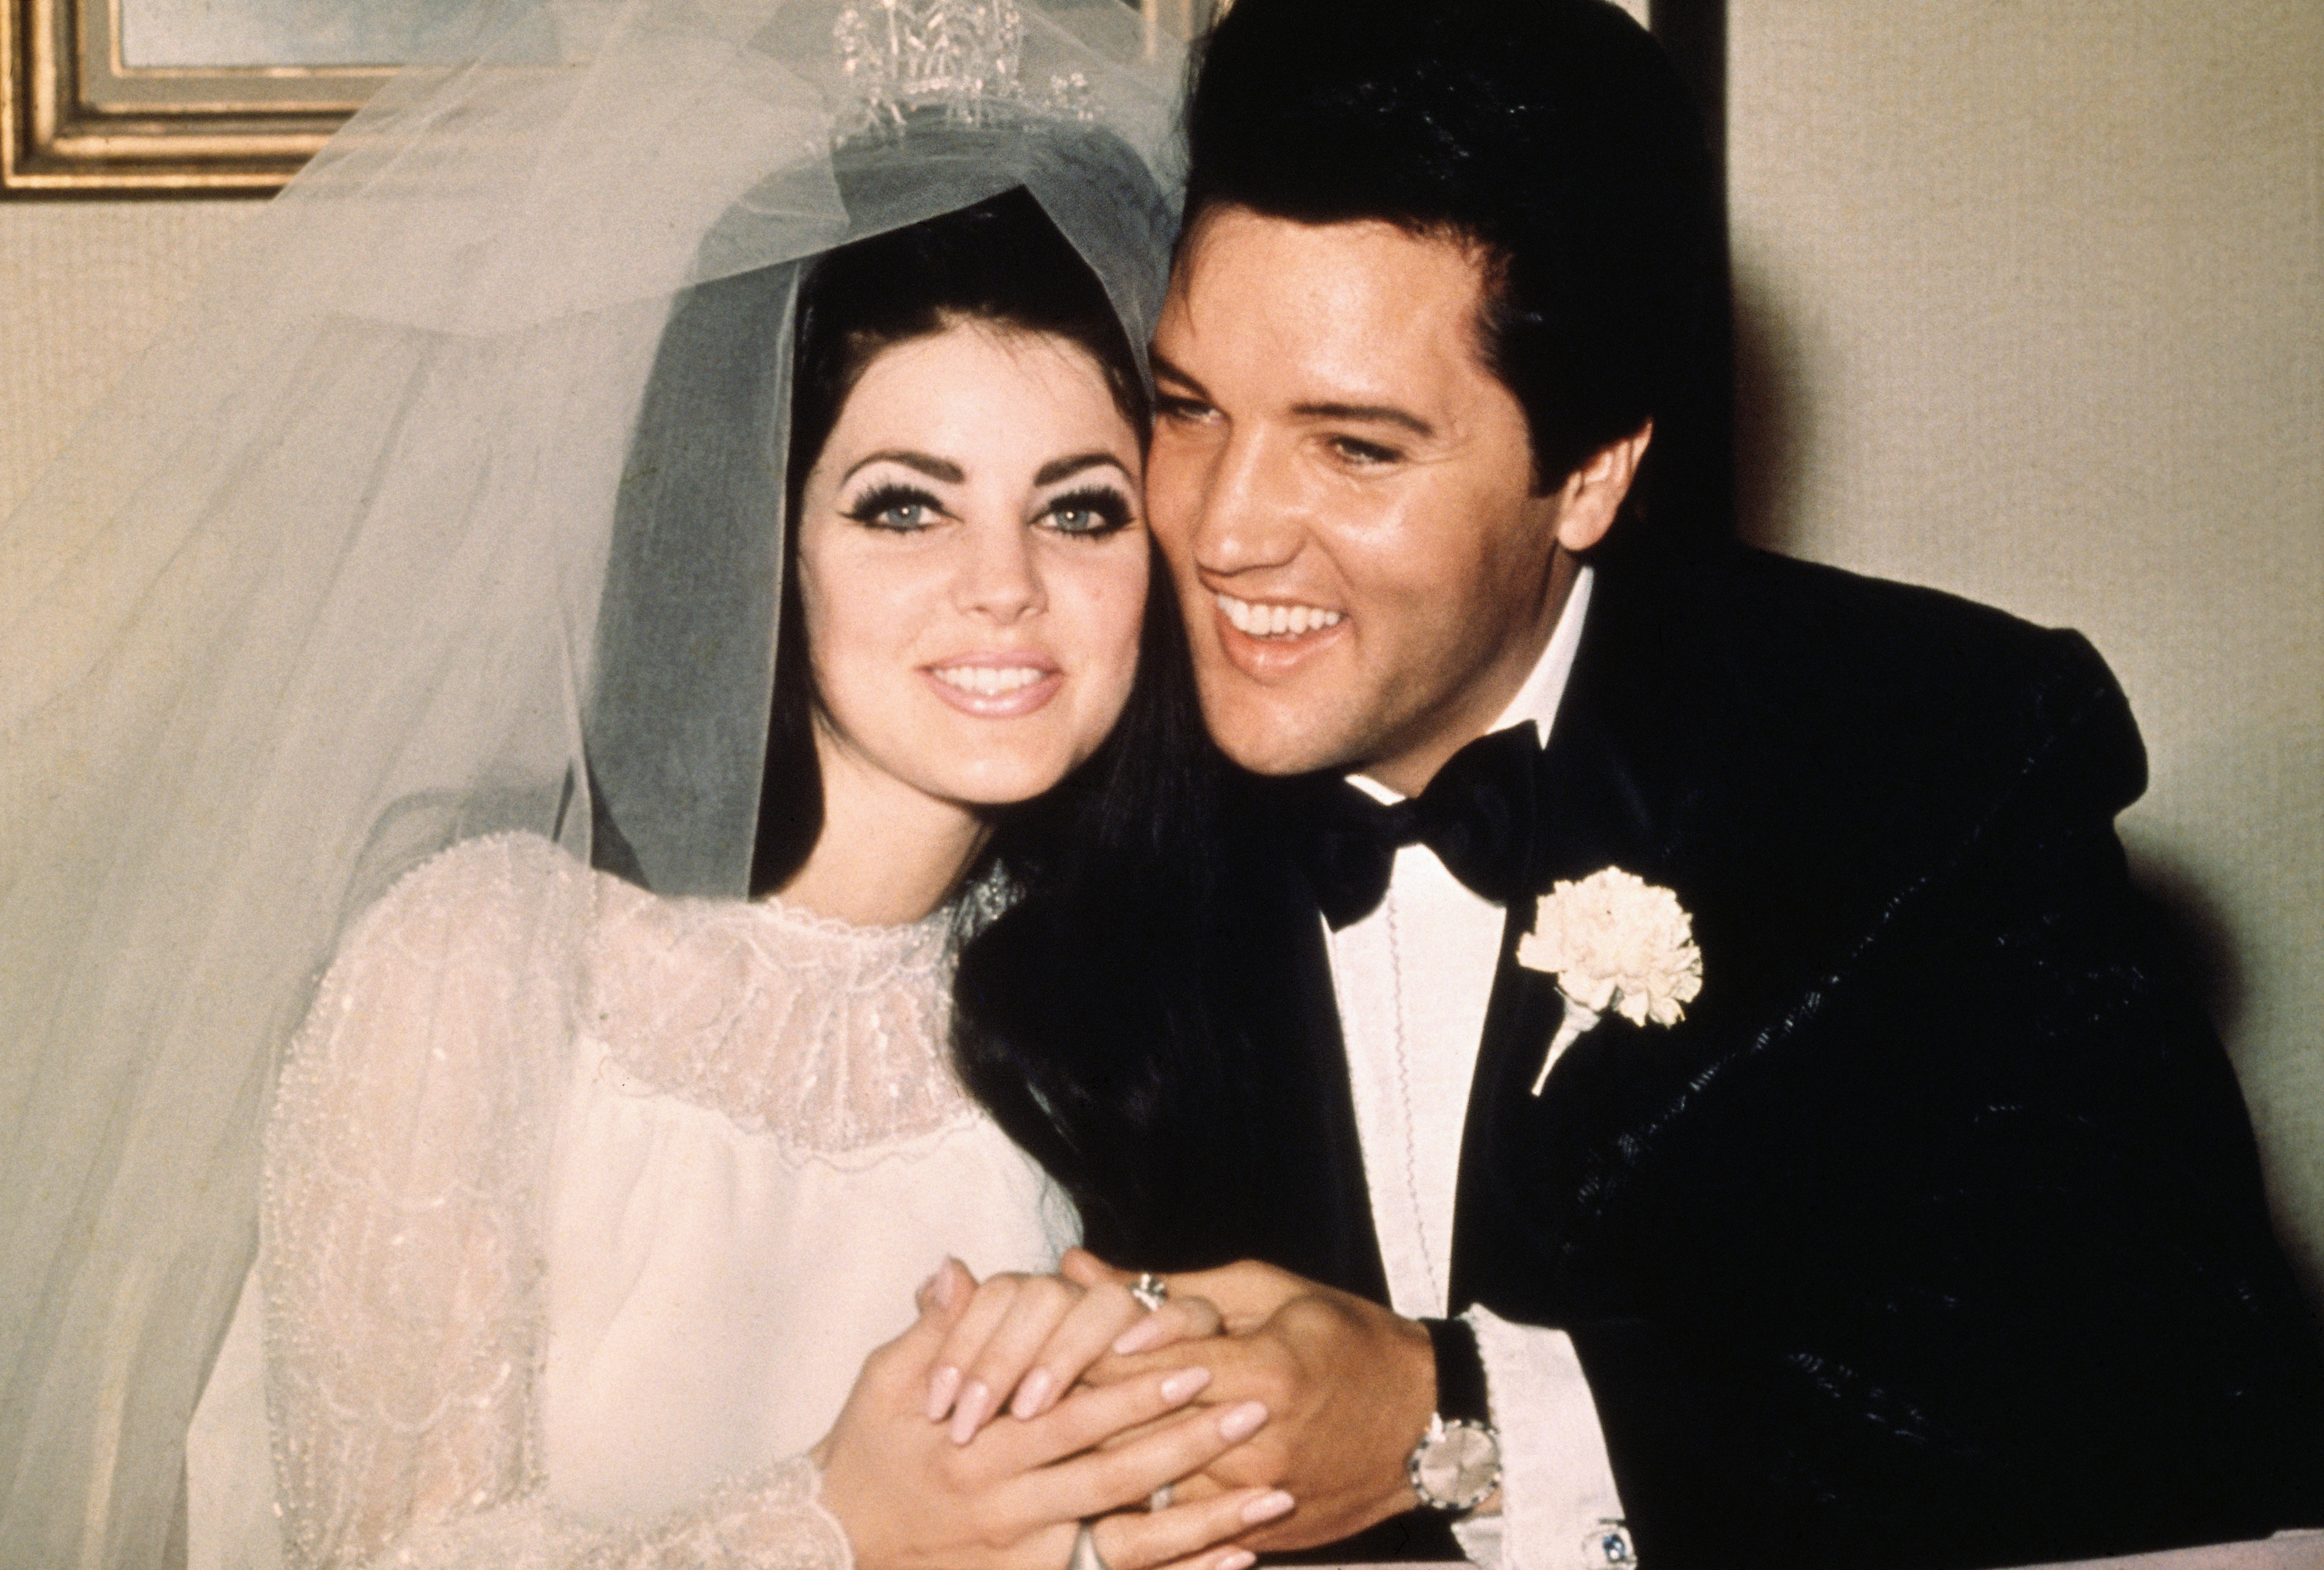 Priscilla and Elvis Presley on their wedding day in Las Vegas, Nevada on  May 1, 1967 | Source: Getty Images